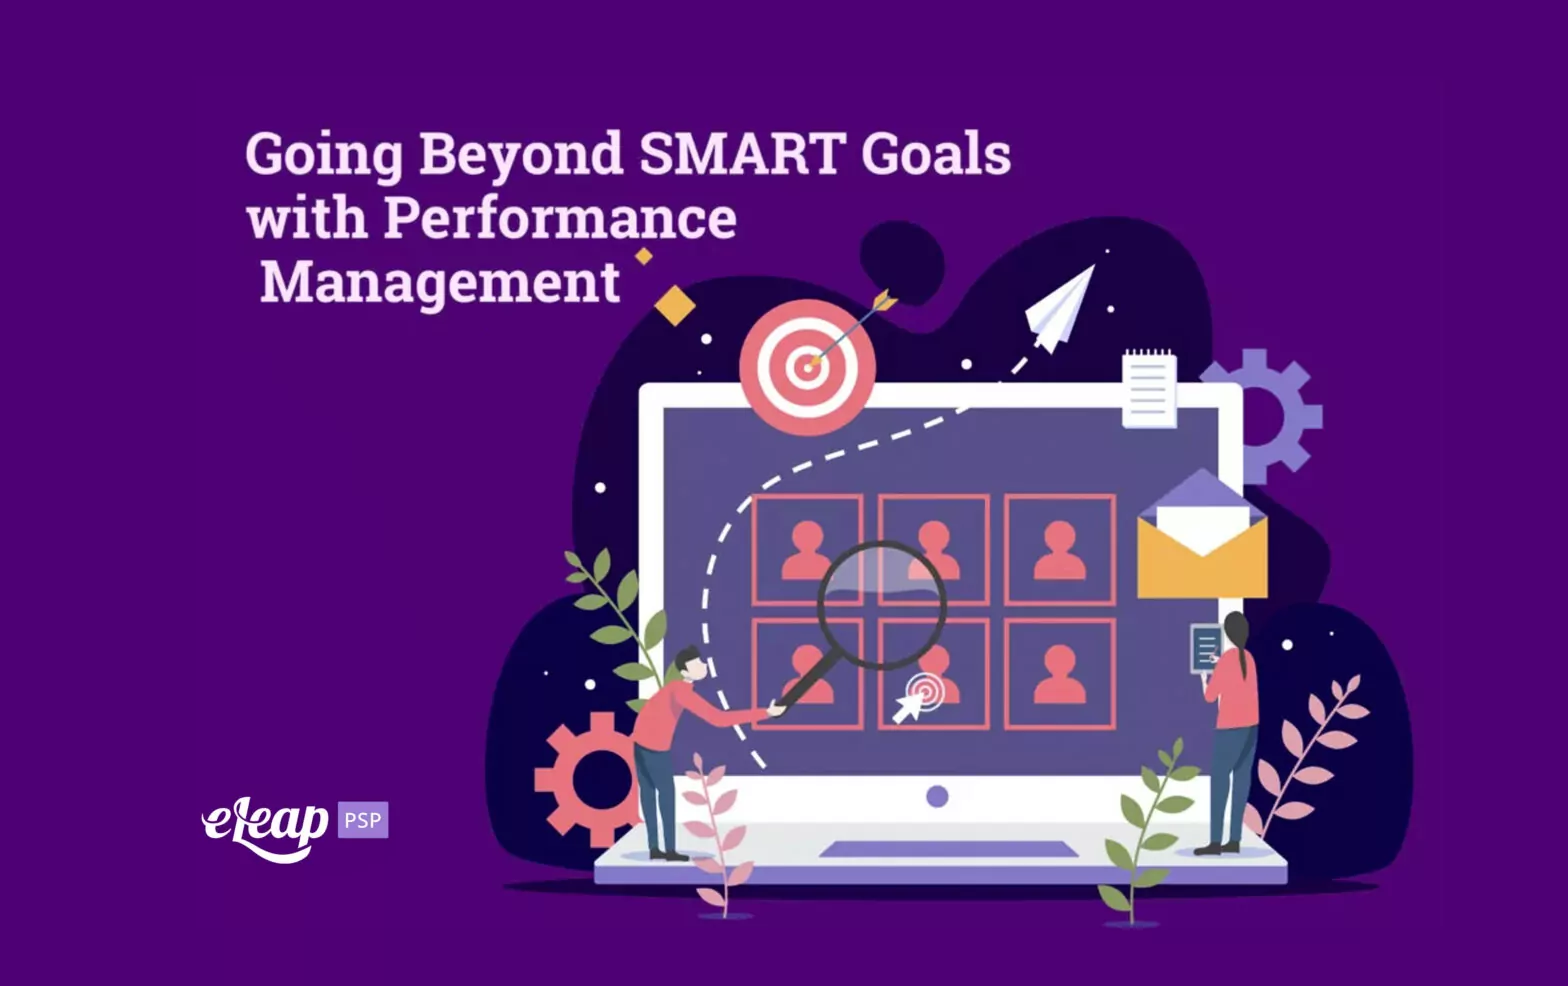 Going Beyond SMART Goals with Performance Management